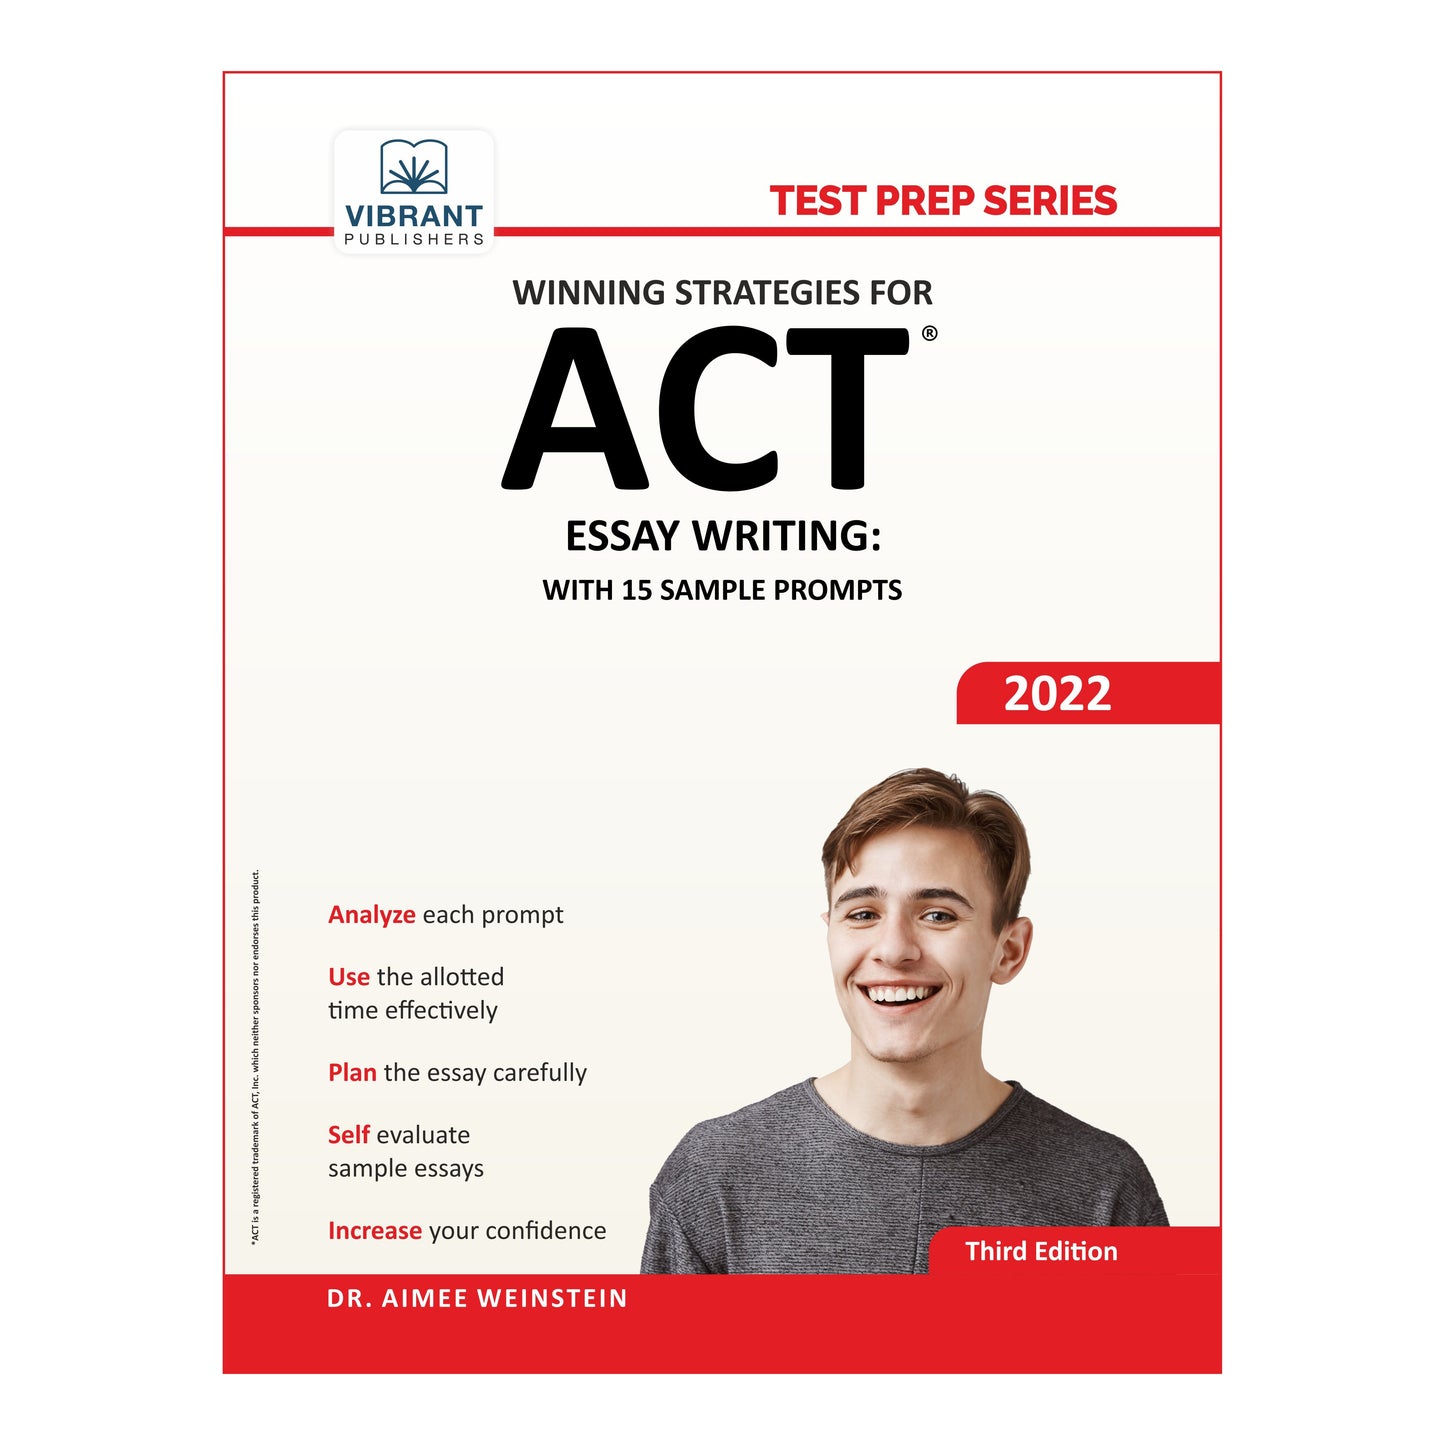 Winning Strategies For ACT Essay Writing: With 15 Sample Prompts (2022 Edition)